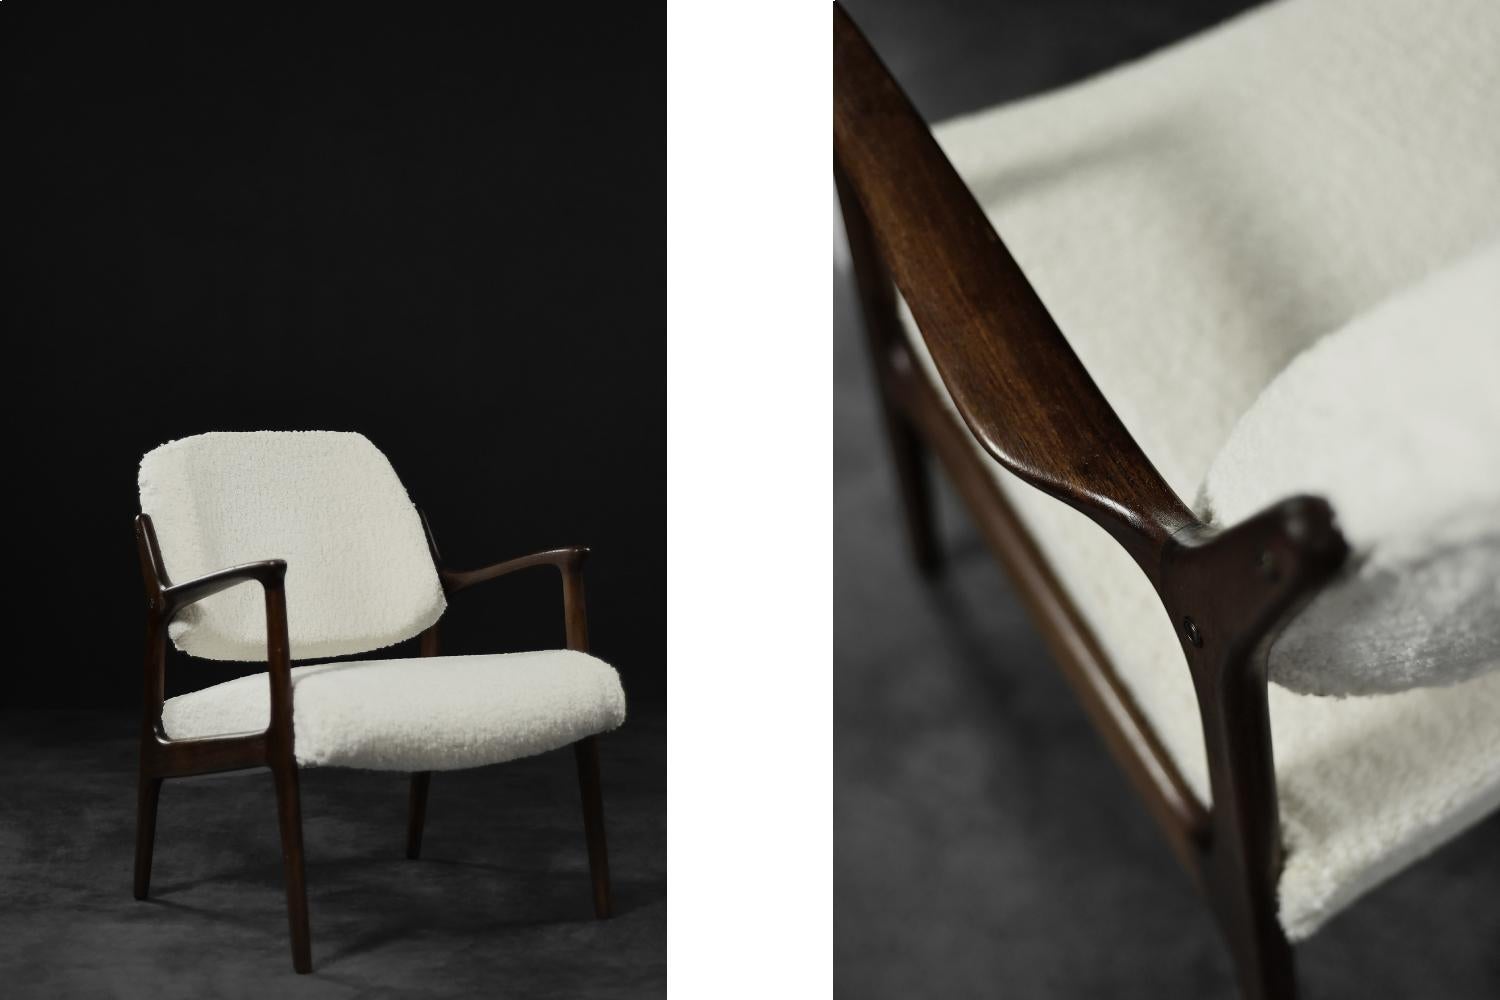 This modernist Domus lounge chair was designed by Inge Andersson for the Swedish manufacture Bröderna Andersson during the 1960s. The elegant frame of the armchair is made of teak in a chestnut shade of brown. The legs of the chair are connected to